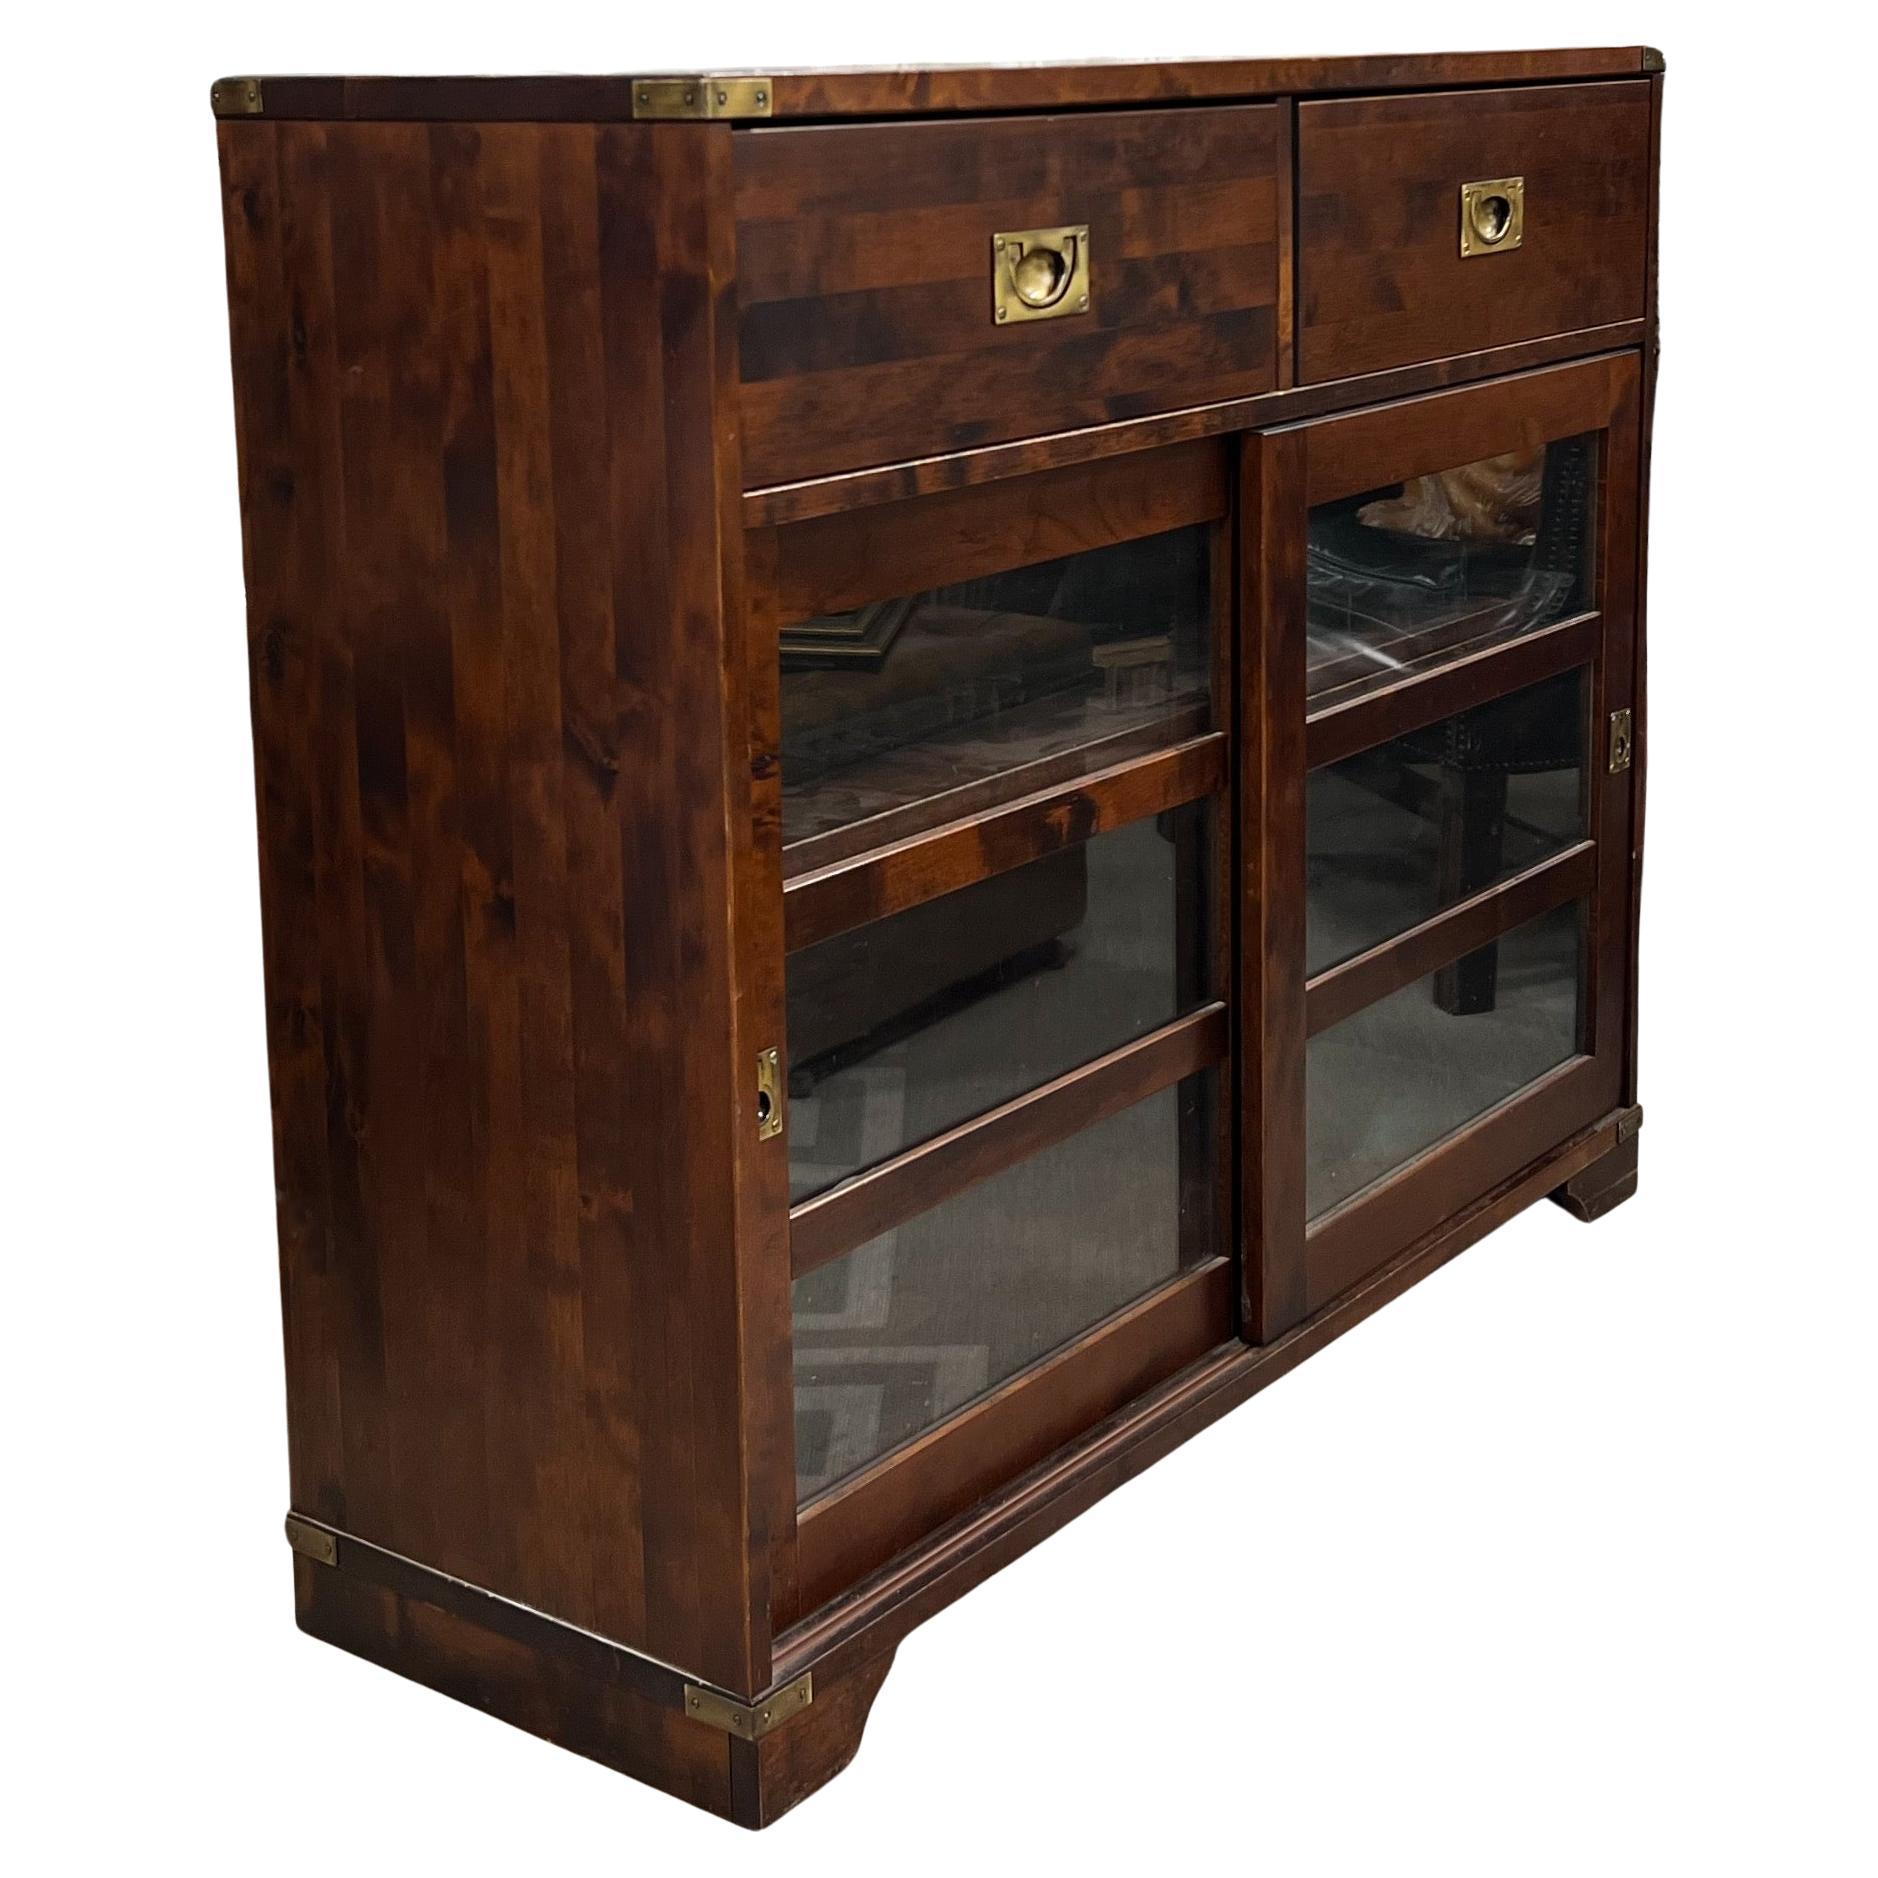 Late 20th-C. English Campaign Style Mahogany and Brass Bookcase / Shelving